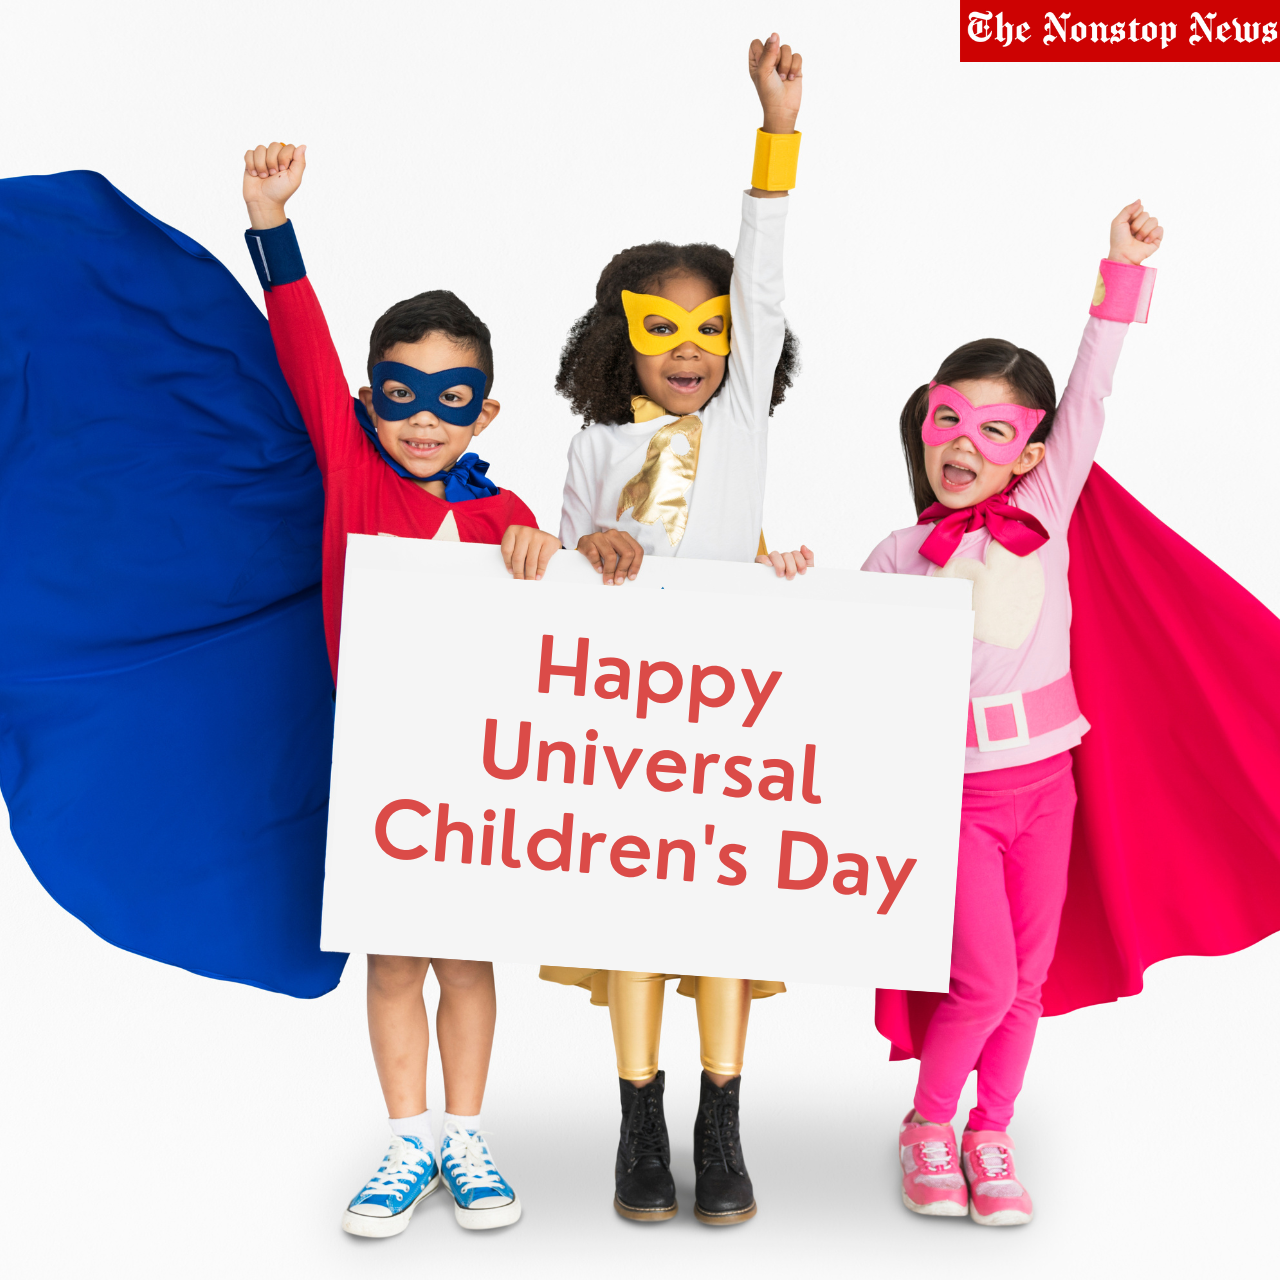 Universal Children's Day 2022: Current Theme, Posters, Quotes, Greetings, Drawings, Banners, Wishes, and Messages